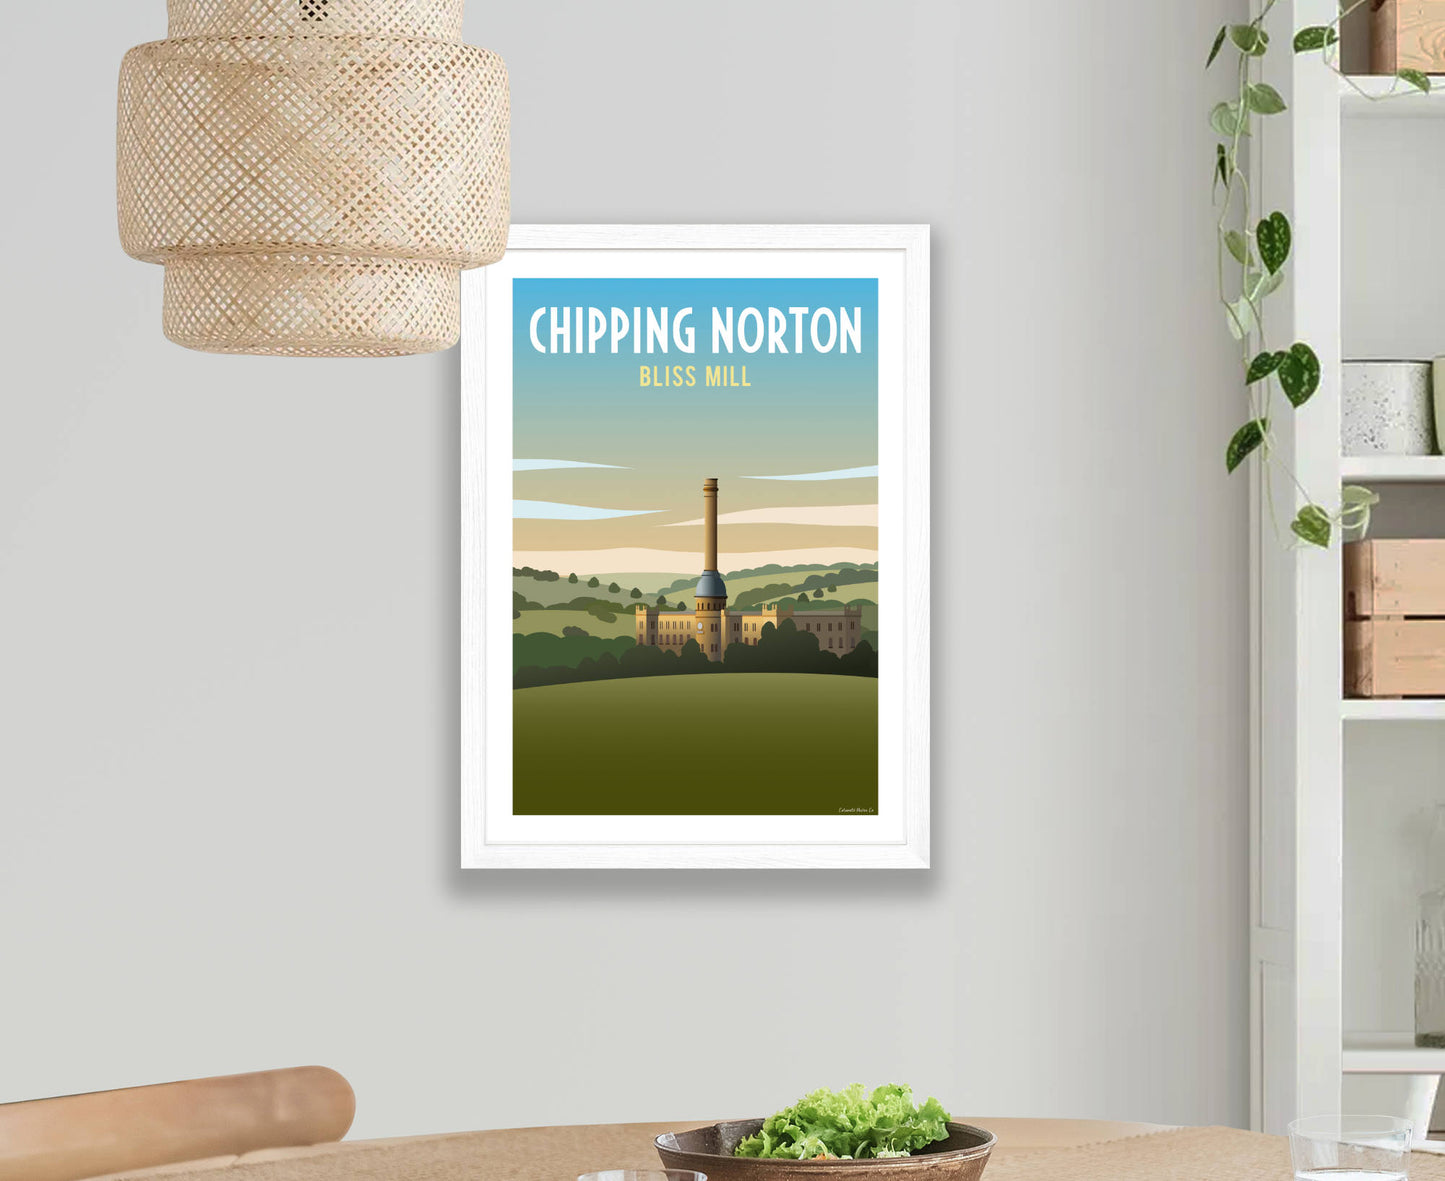 Chipping Norton Bliss Mill Poster in white frame